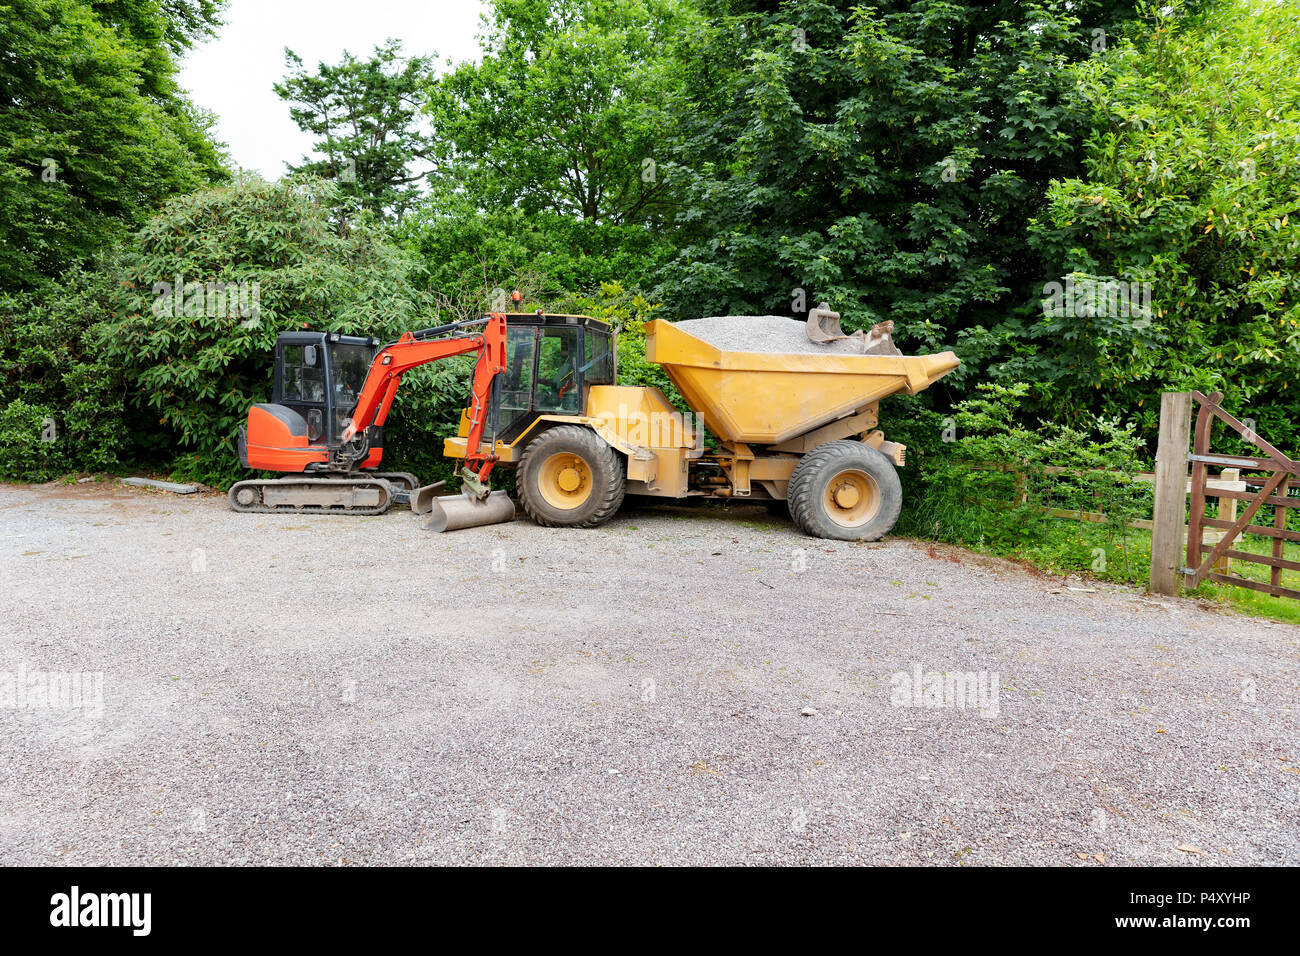 Construction equipment on job location with stone for road work Stock Photo